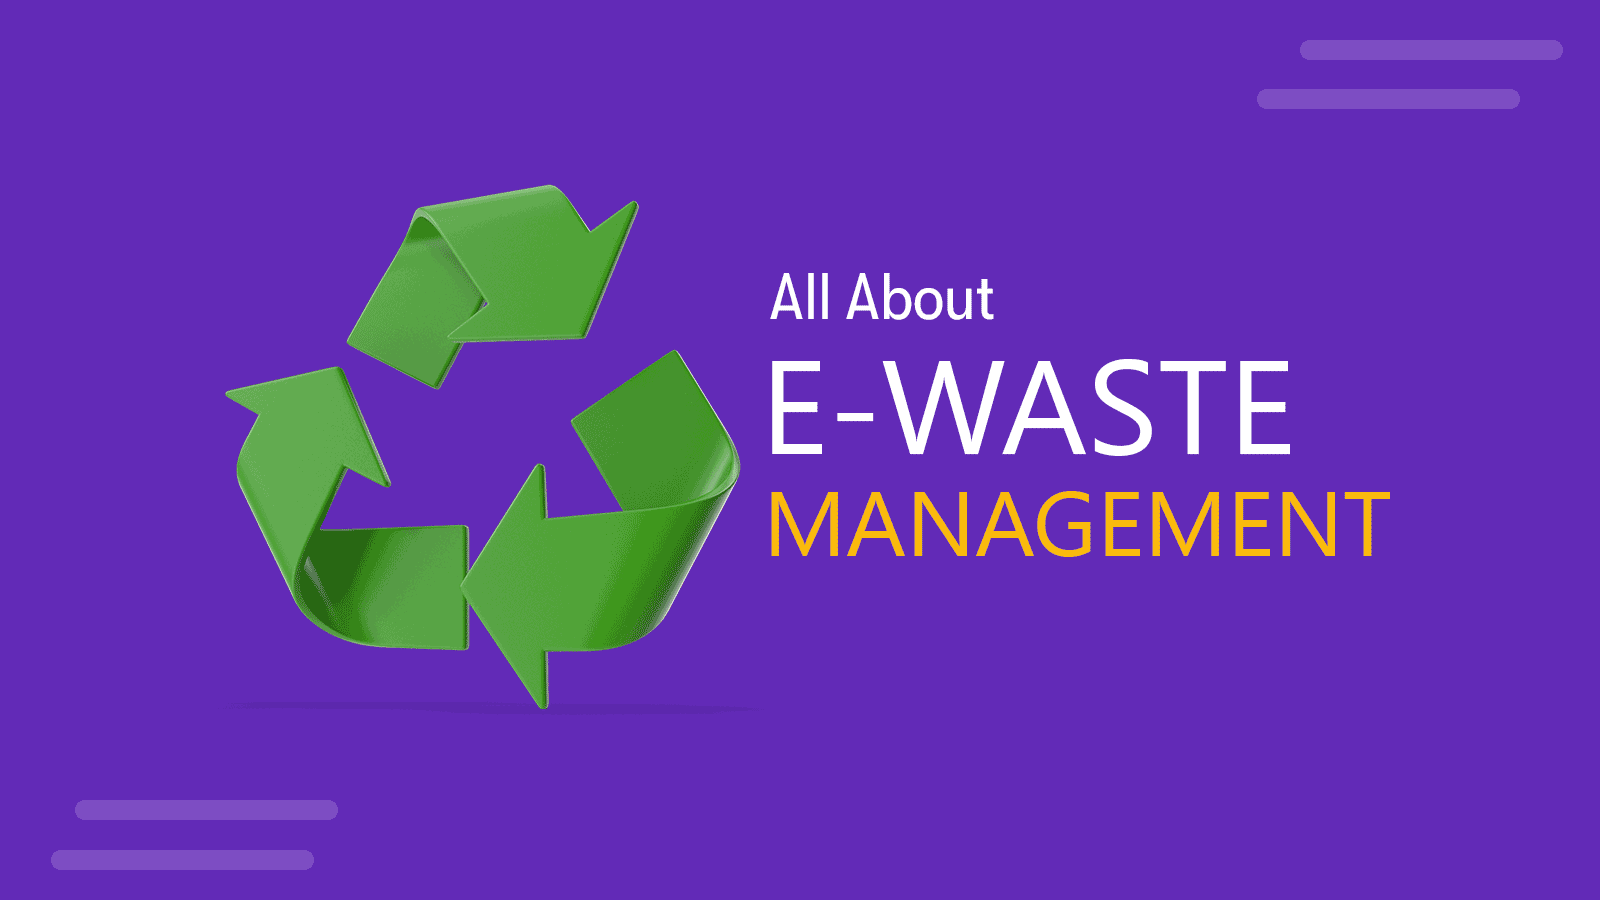 All About E-Waste Management